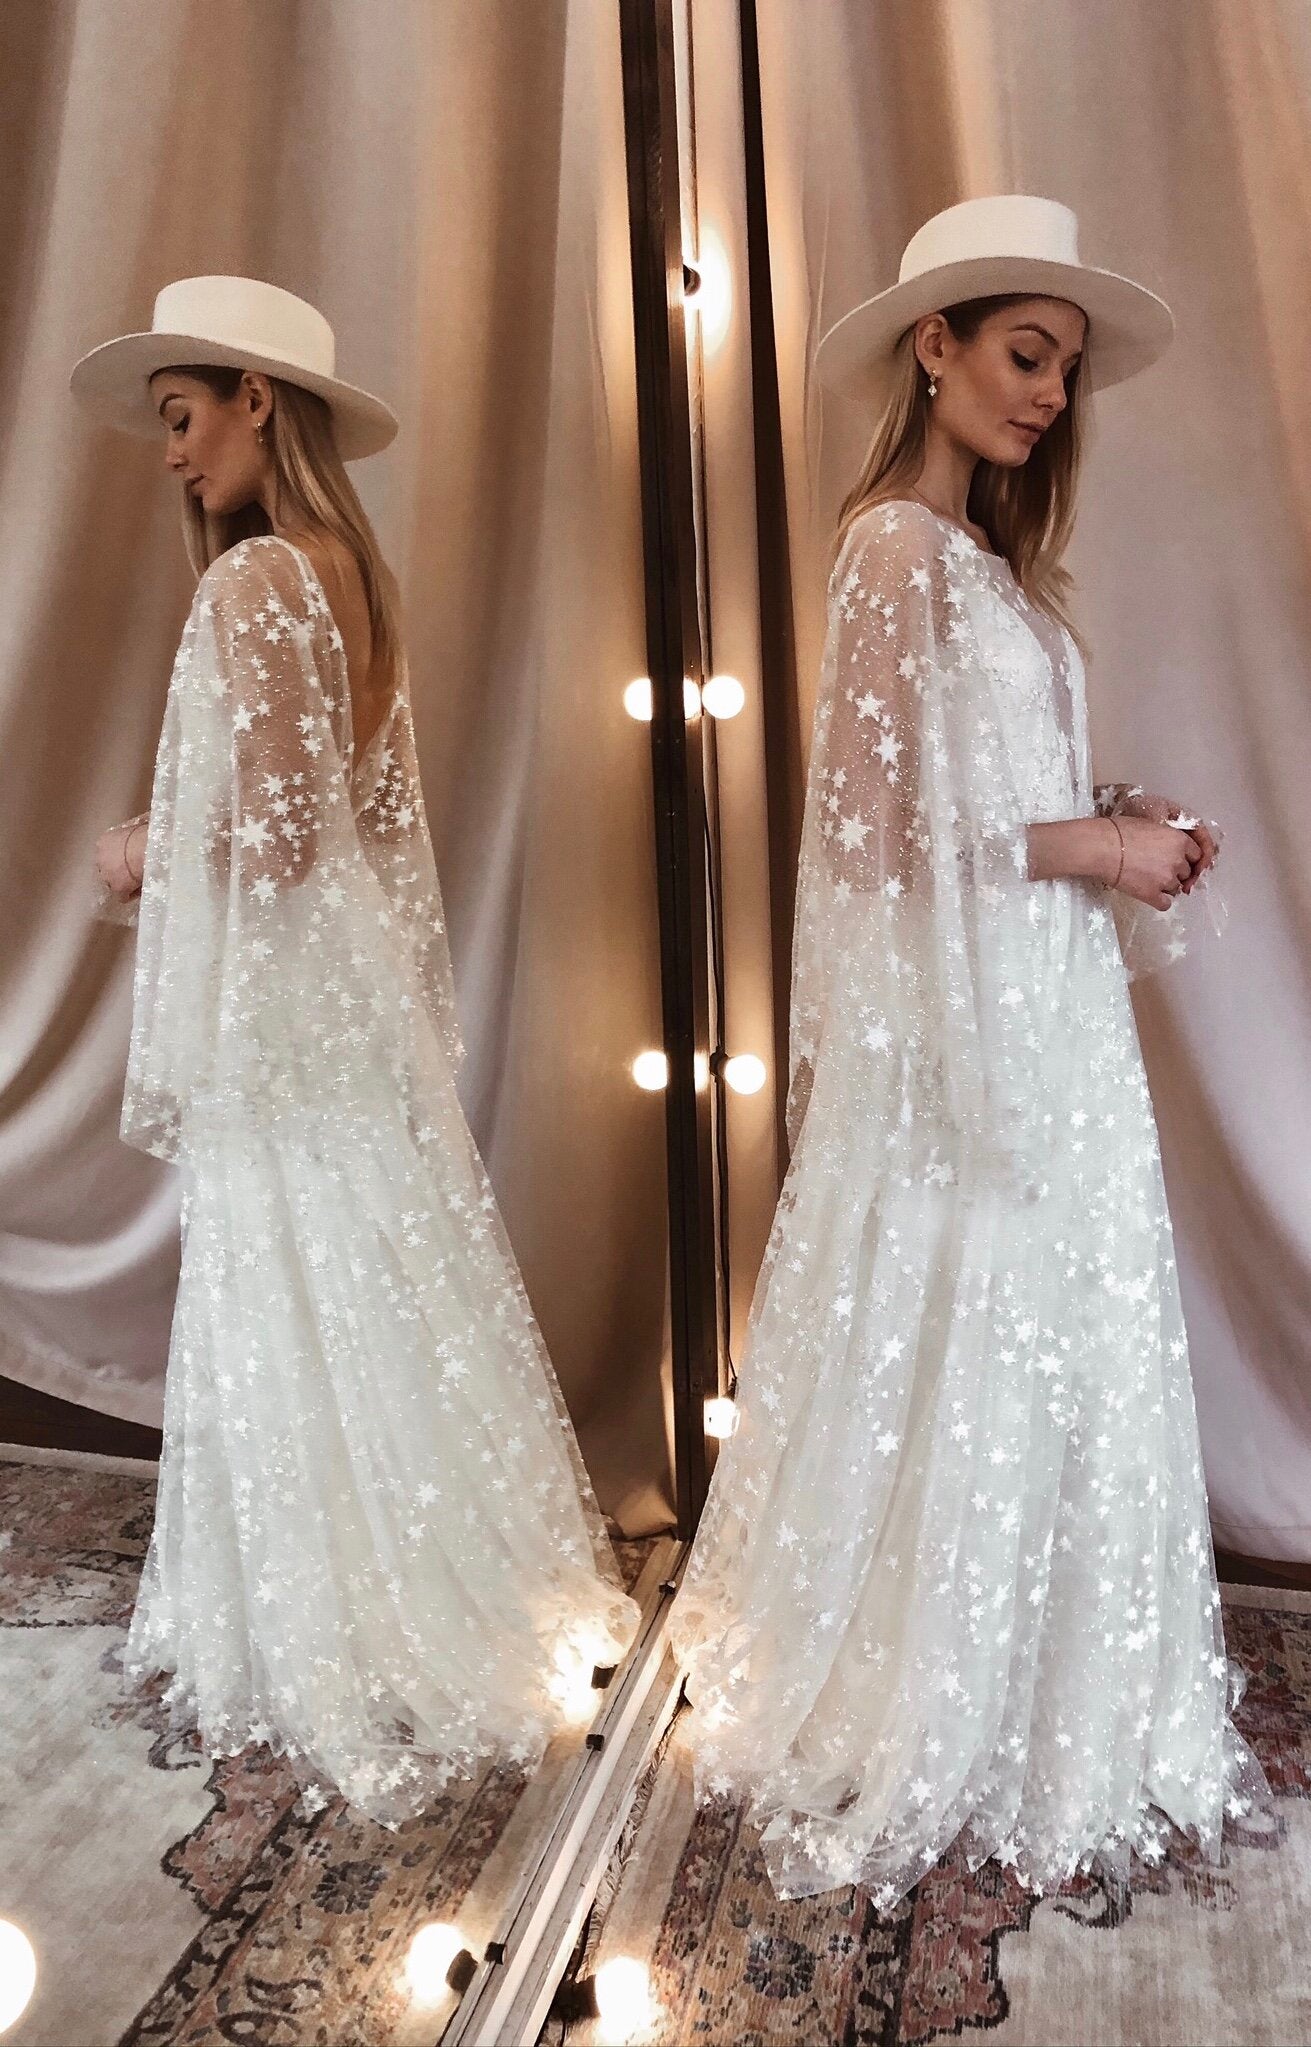 Bohemian Wedding Dresses: 30 Gowns For A Dreamy Look